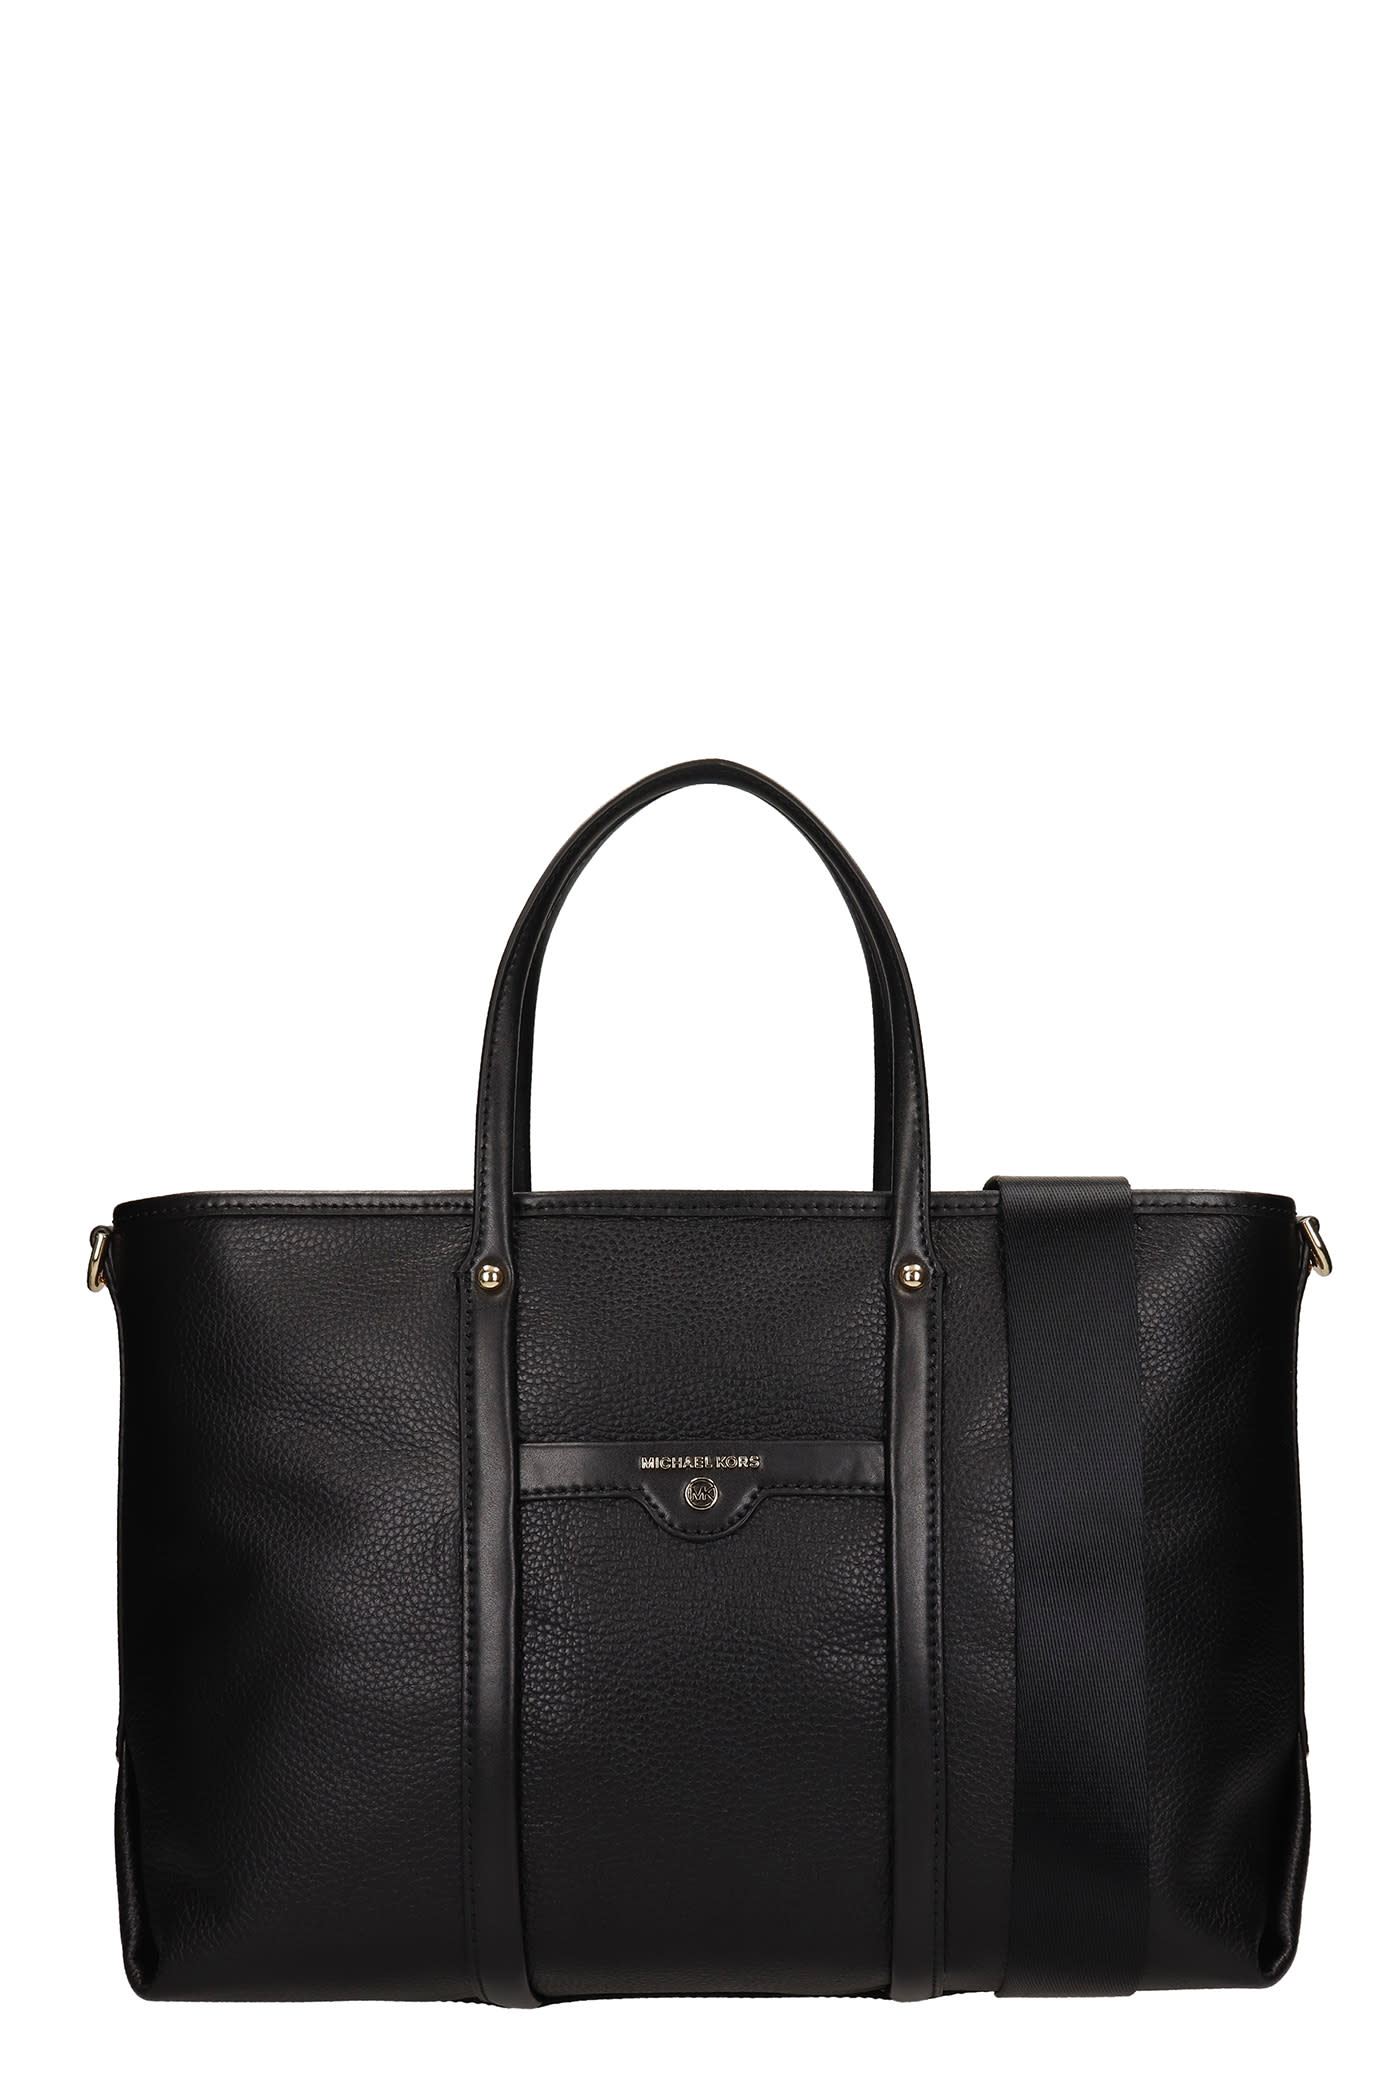 Michael Kors Beck Tote In Black Leather